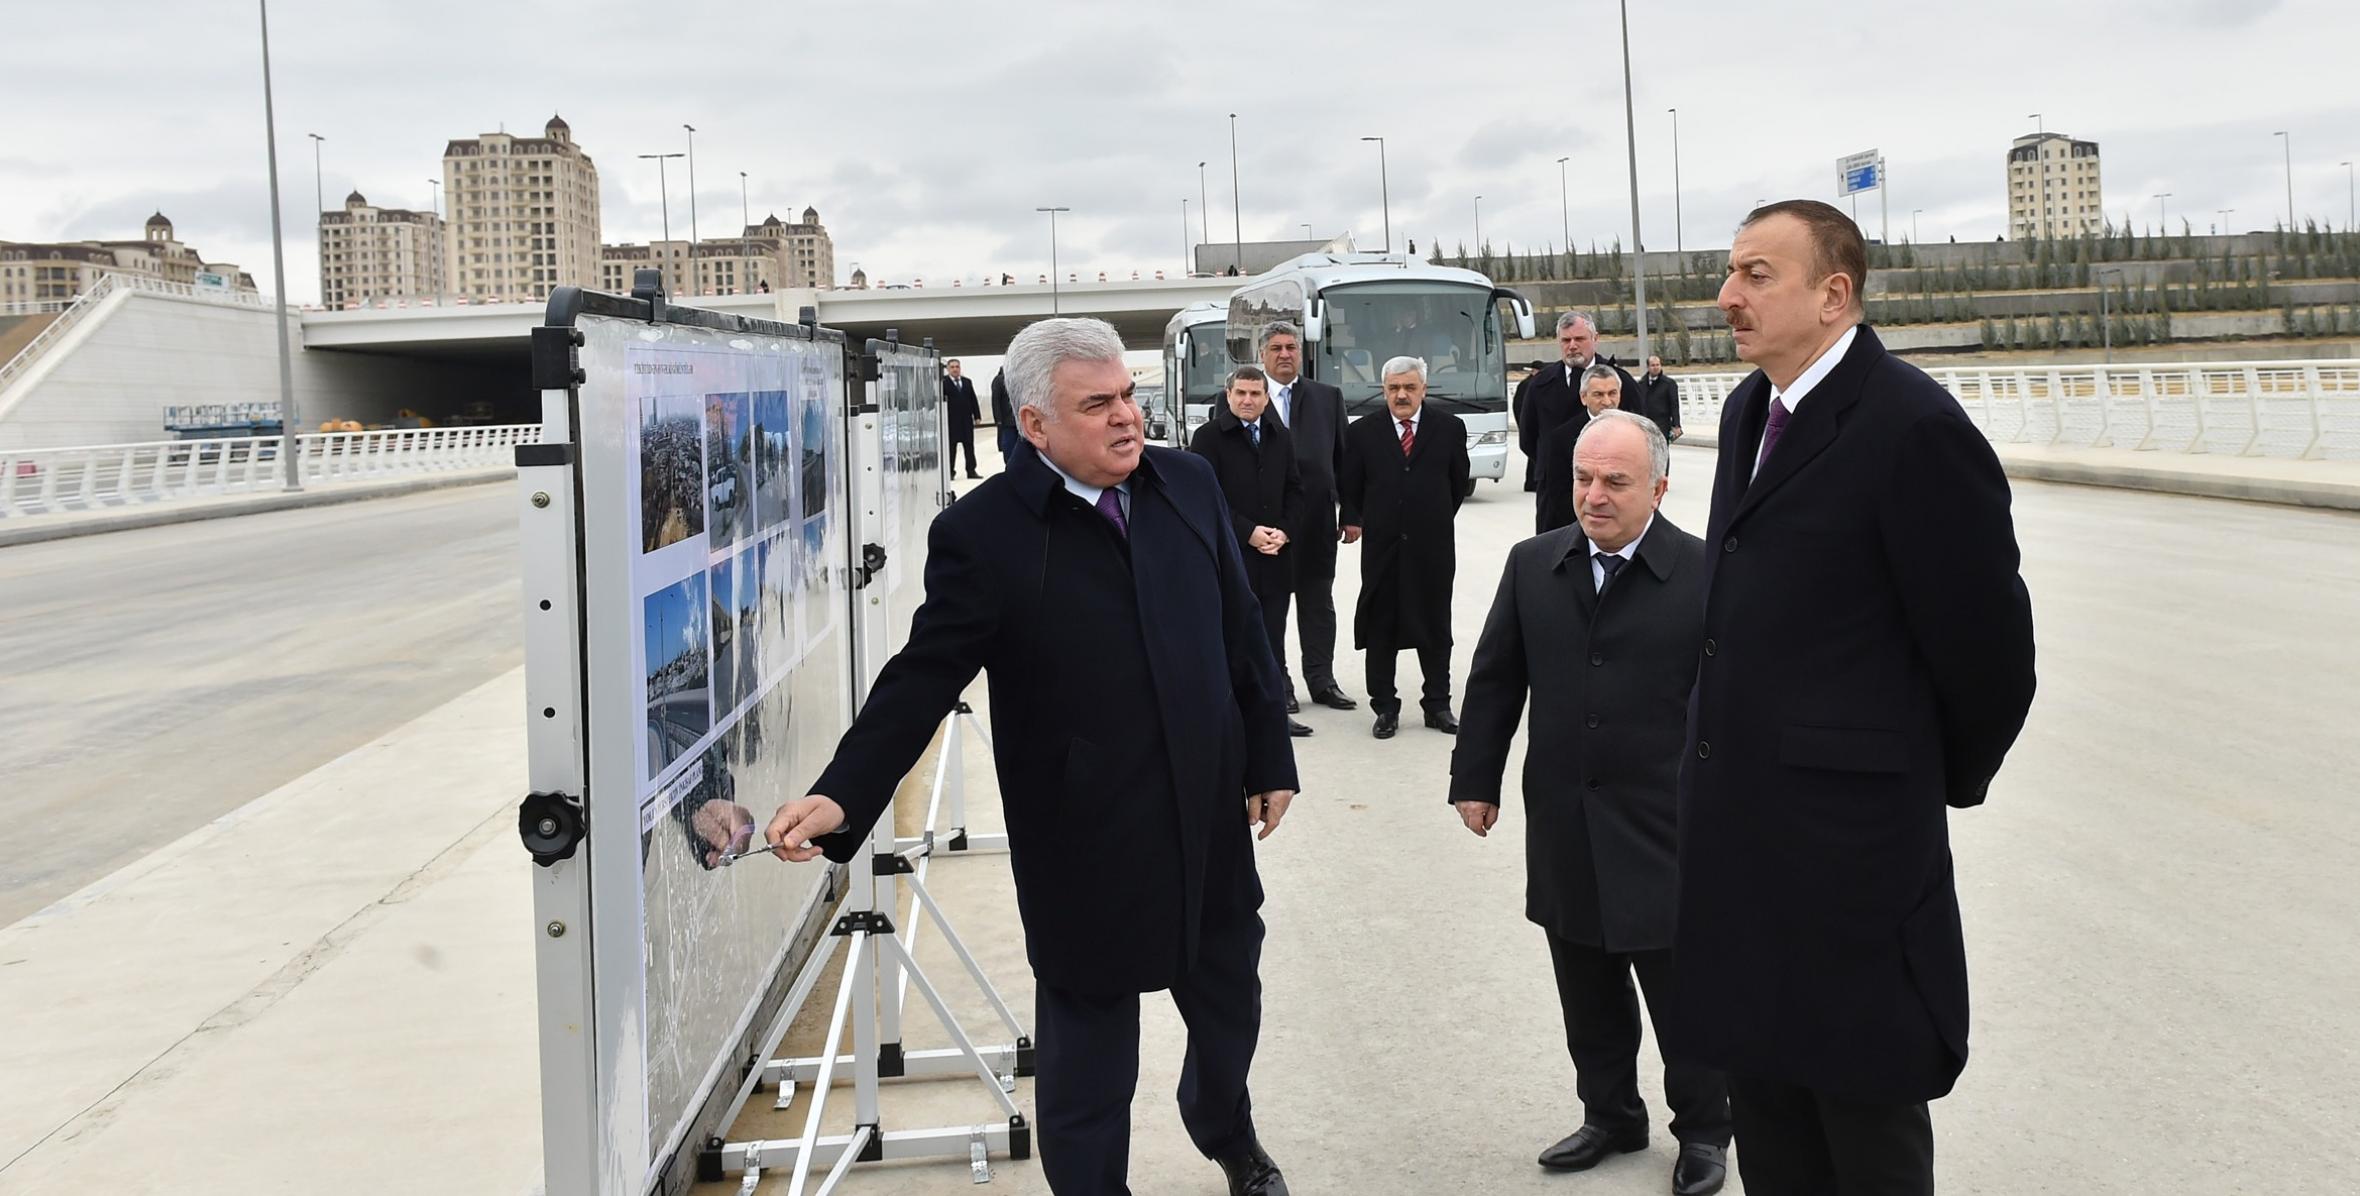 Ilham Aliyev reviewed ongoing construction of road and transportation infrastructure around the Baku Olympic Stadium